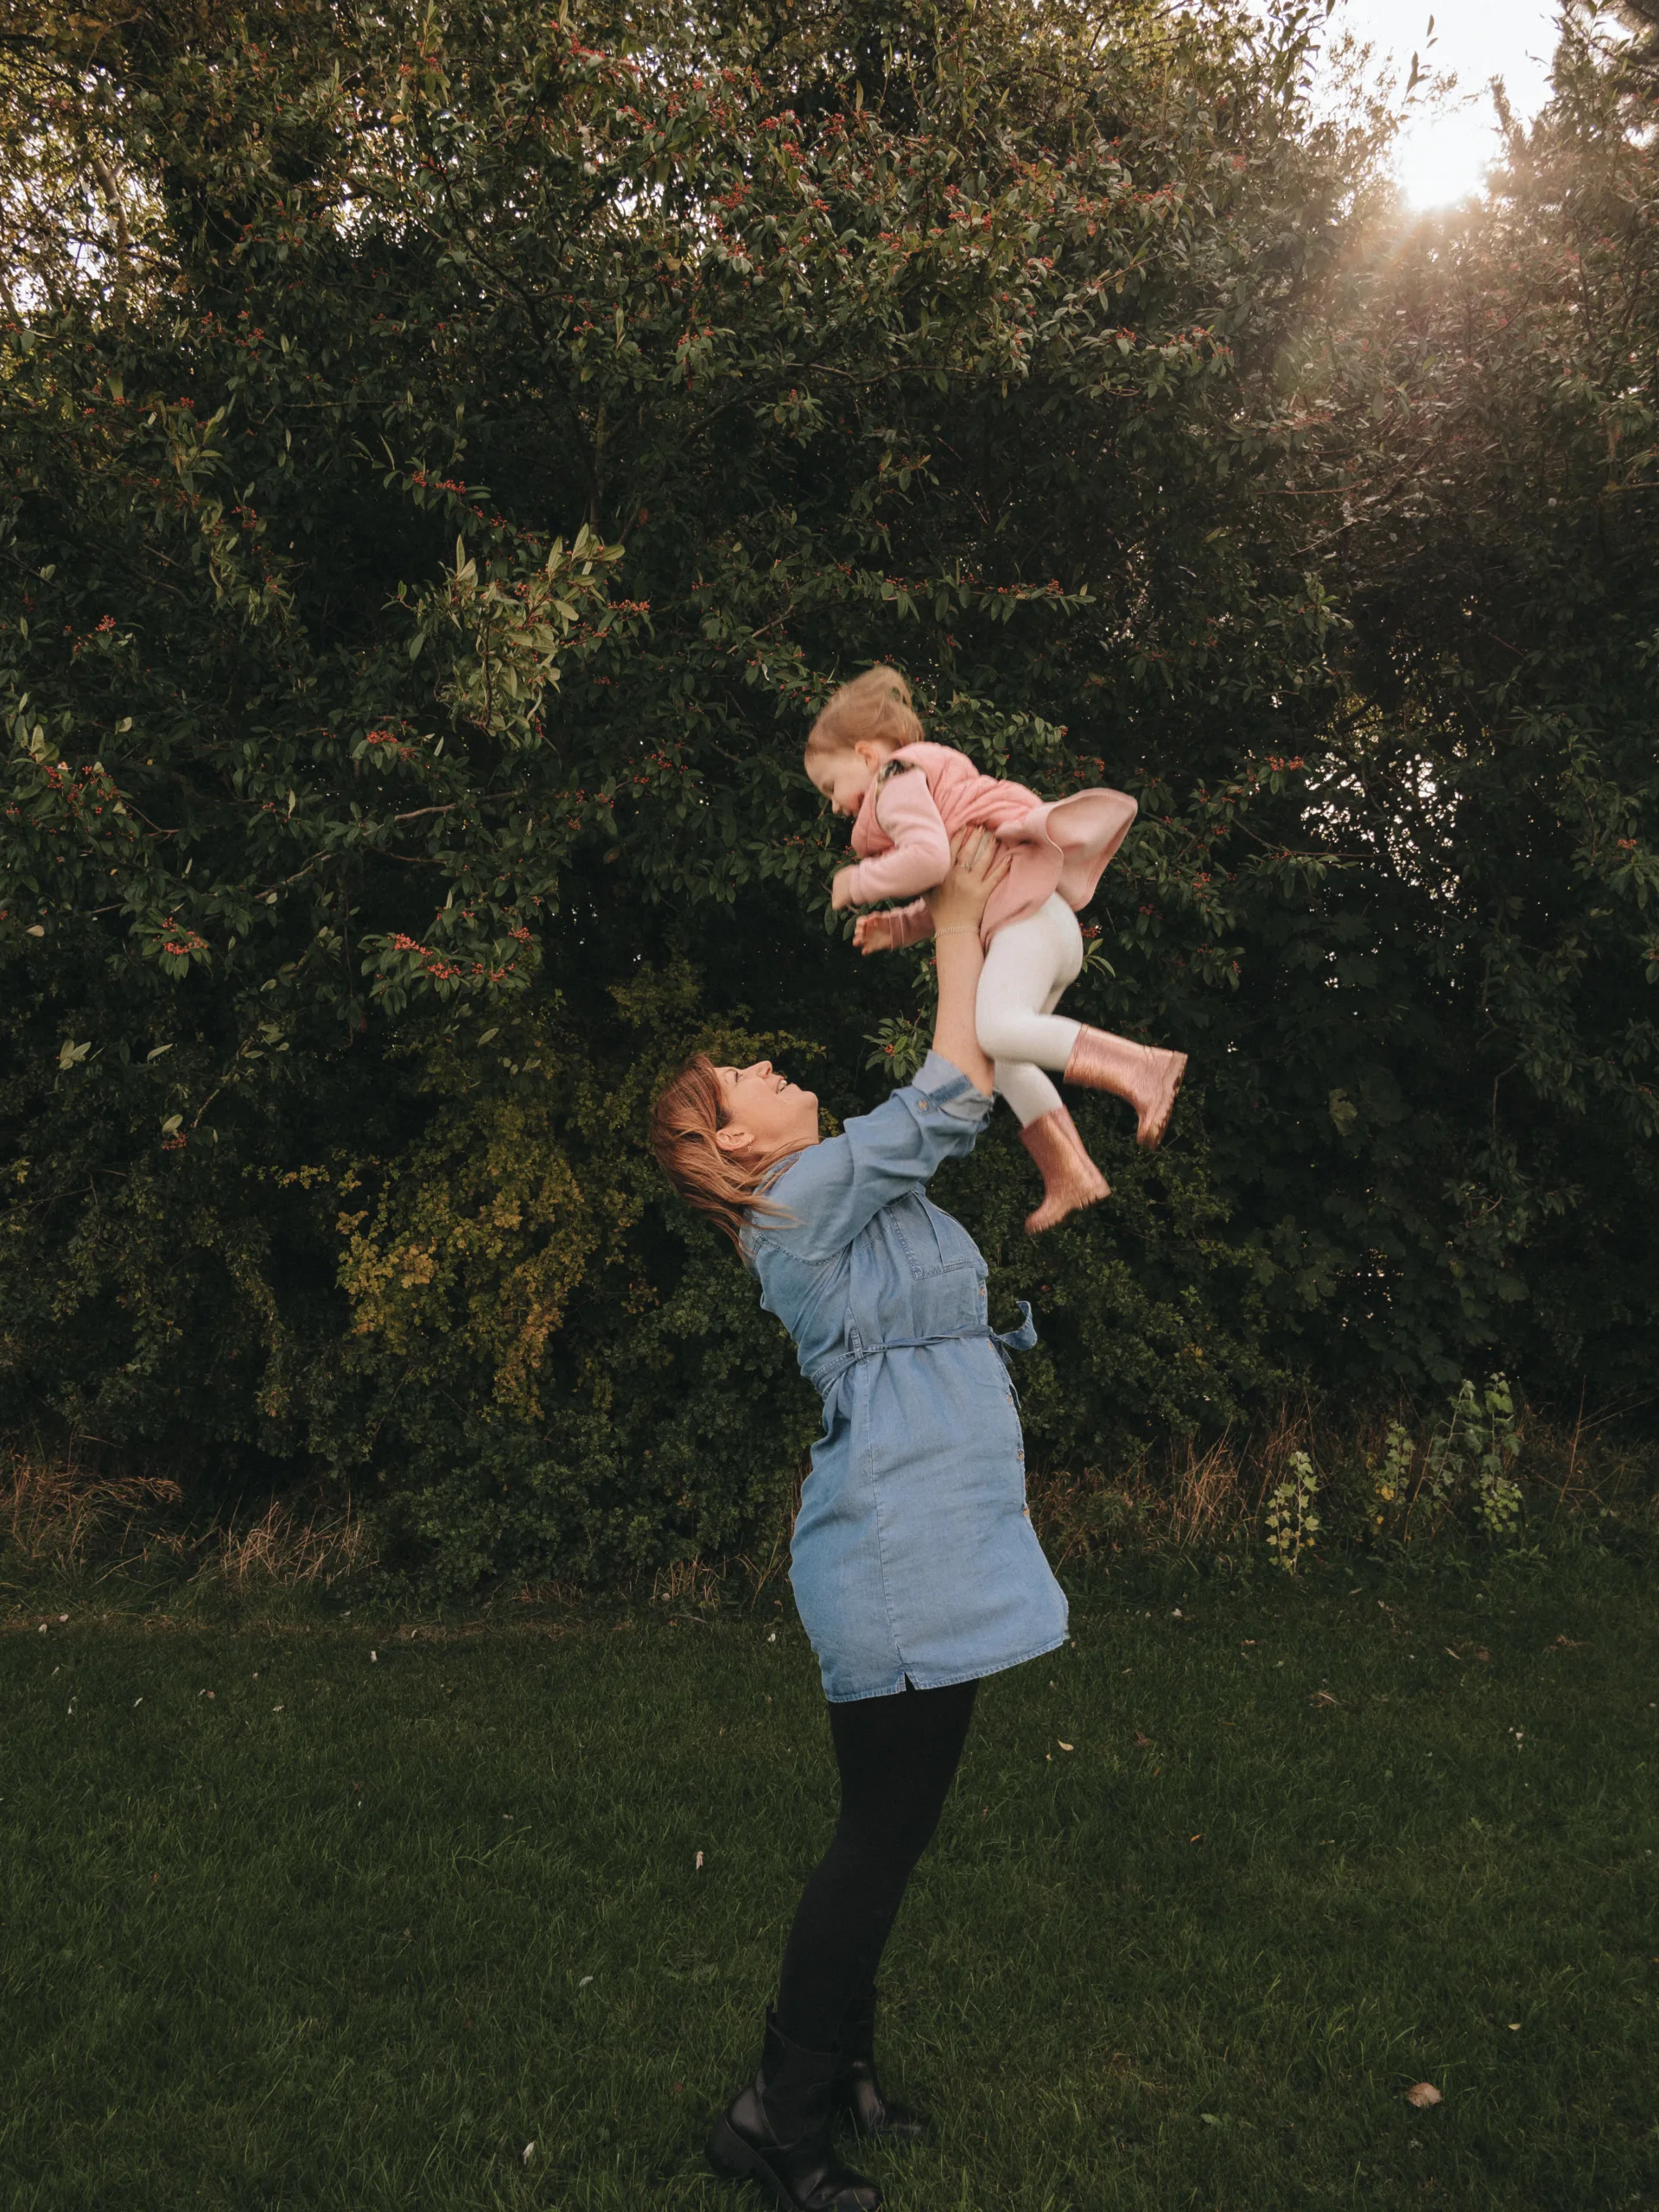 A woman is holding her daughter in the air in a field, captured by a photographer.